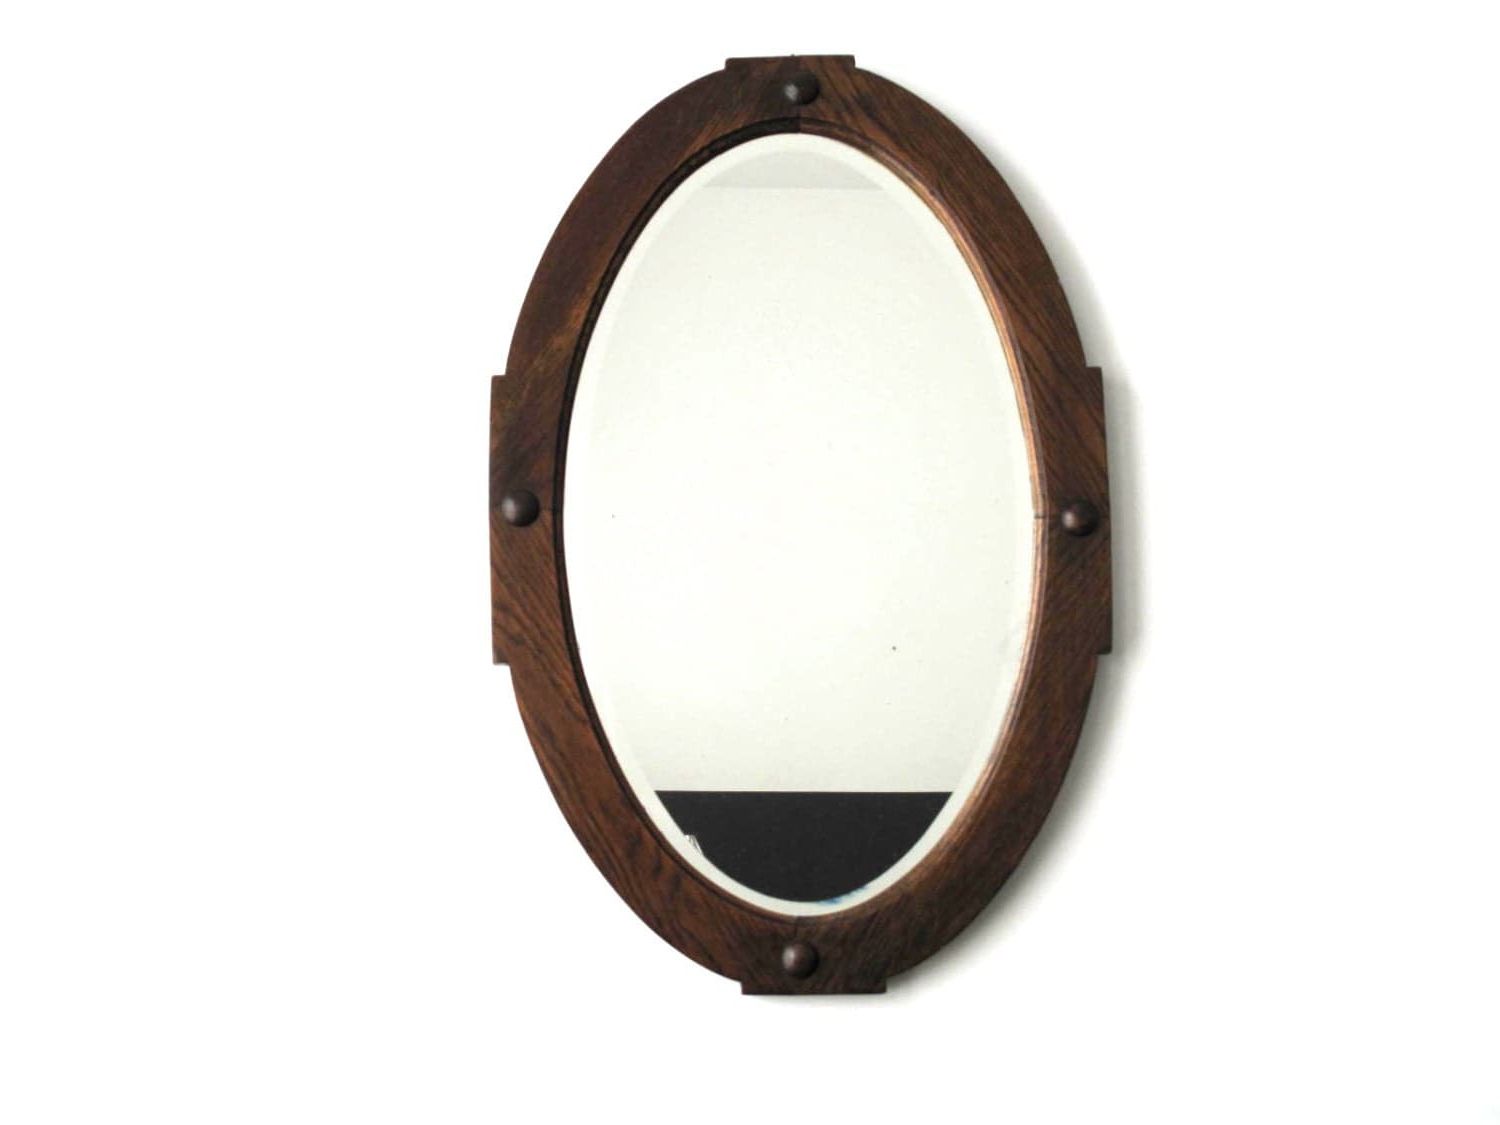 Wooden Oval Wall Mirrors For Widely Used Antique Wood Framed Oval Wall Mirror Vintagesnapshotvintage (View 3 of 15)